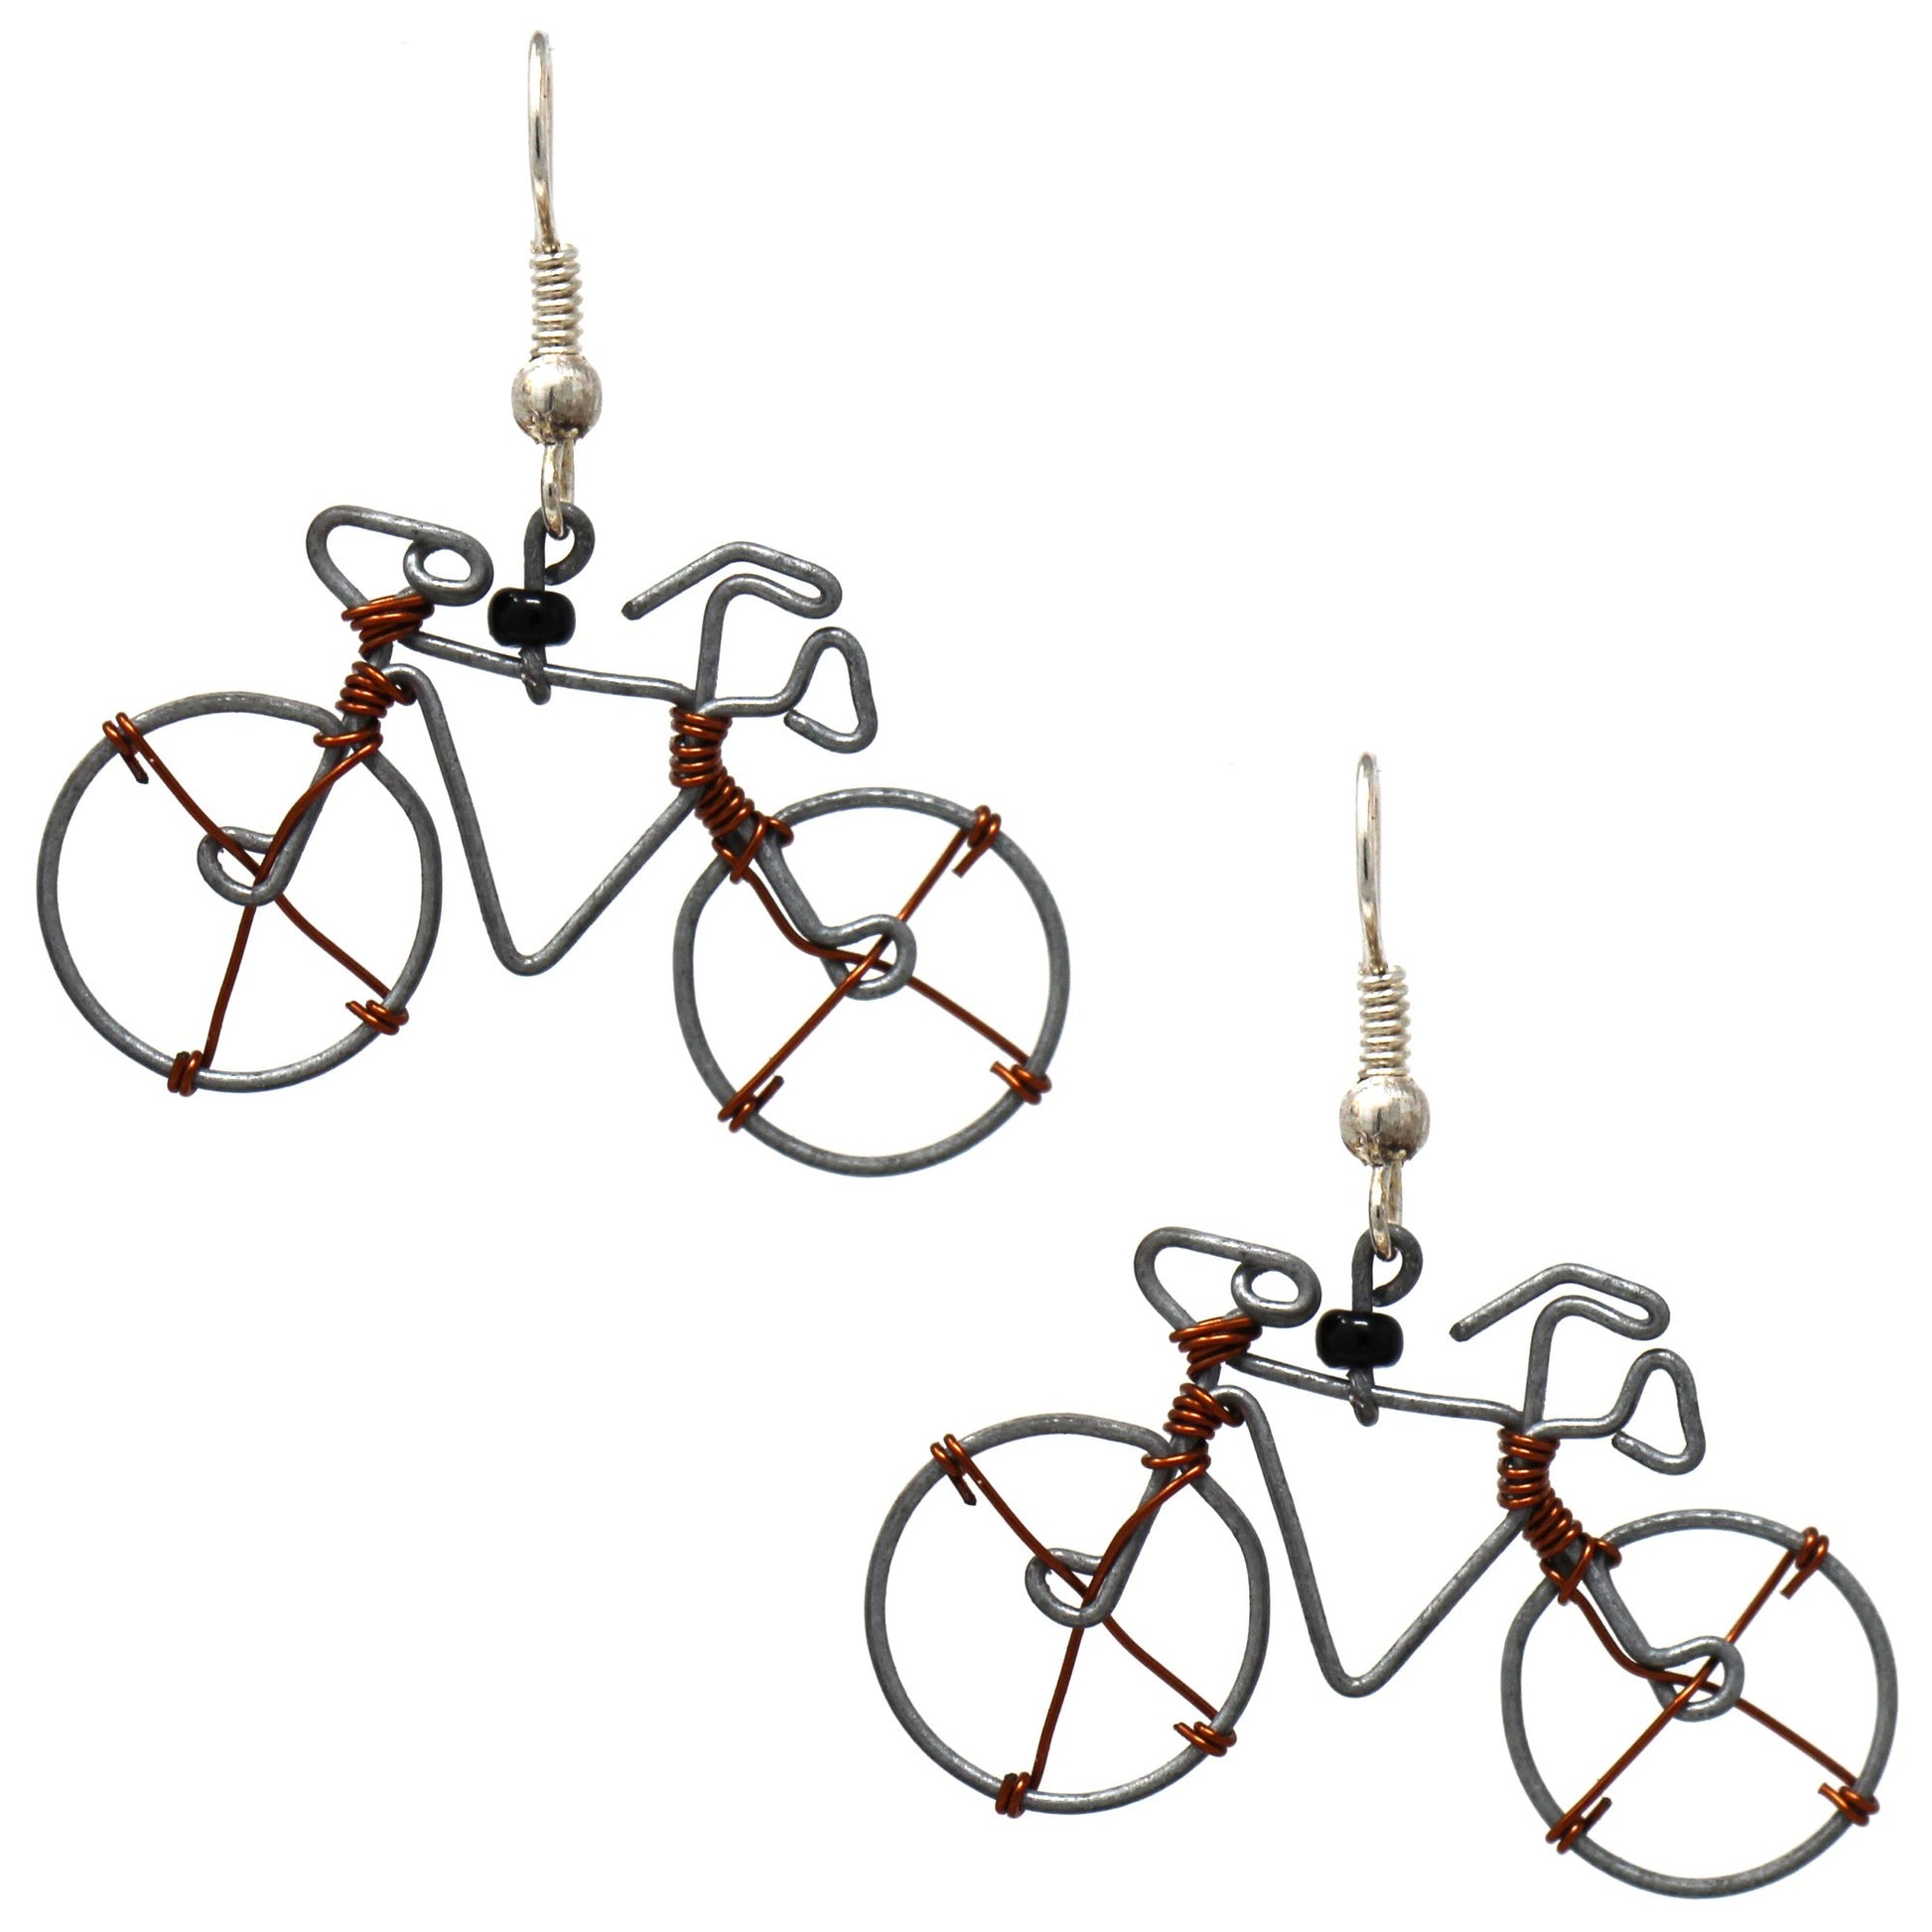 Recycled Wire Bicycle Earrings - Linda Kay Gifford’s - Those Nasty Women TALK! by SWEETSurvivor